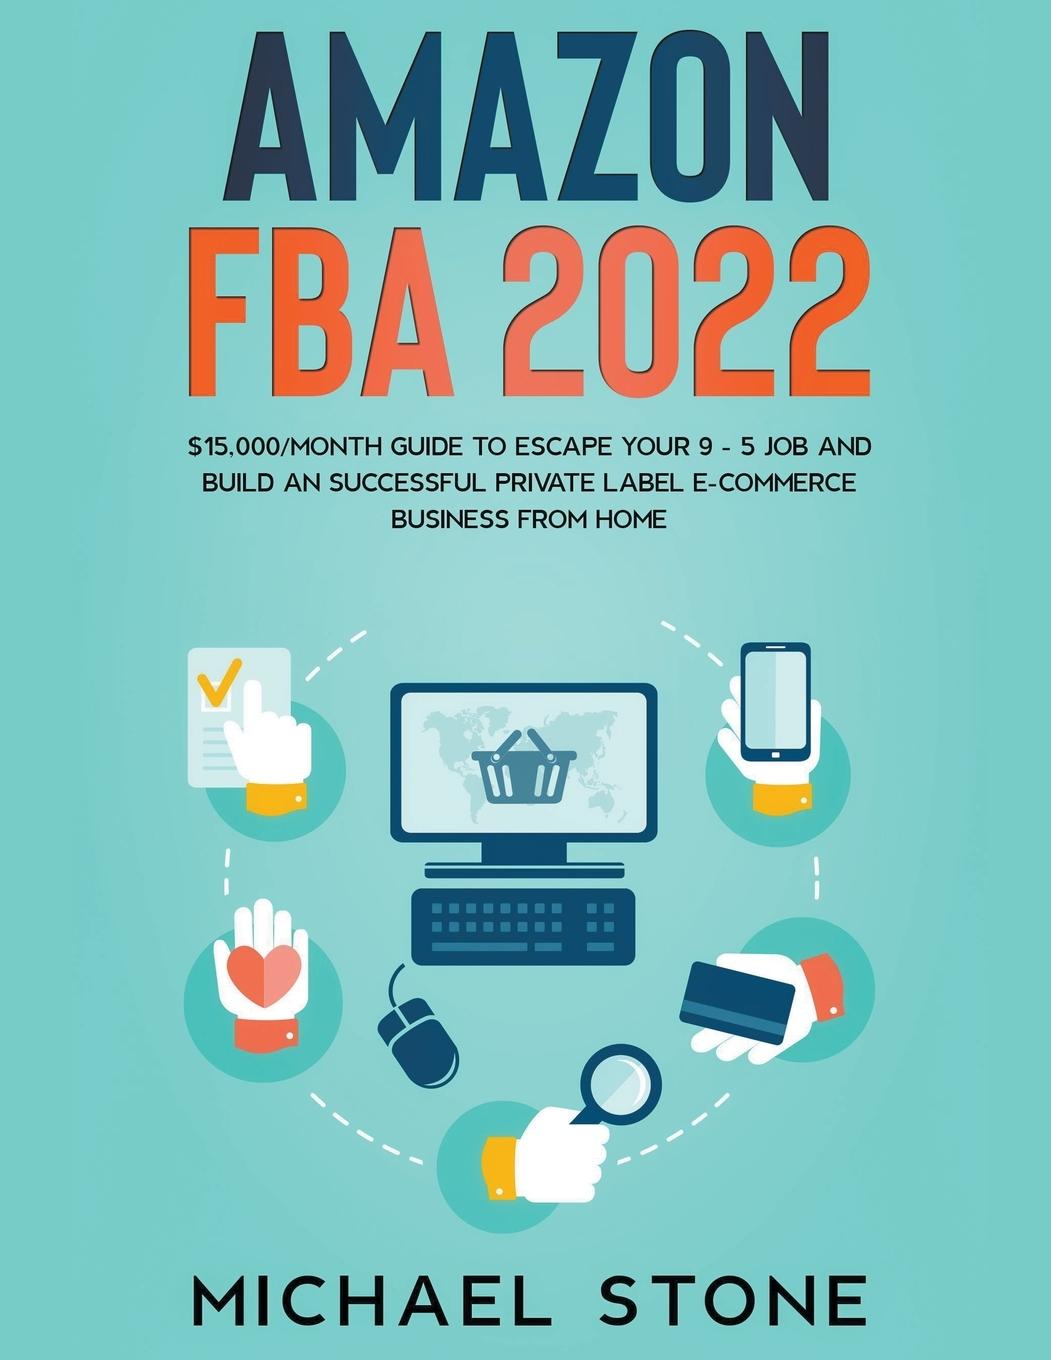 Carte Amazon FBA 2022 $15,000/Month Guide To Escape Your 9 - 5 Job And Build An Successful Private Label E-Commerce Business From Home 